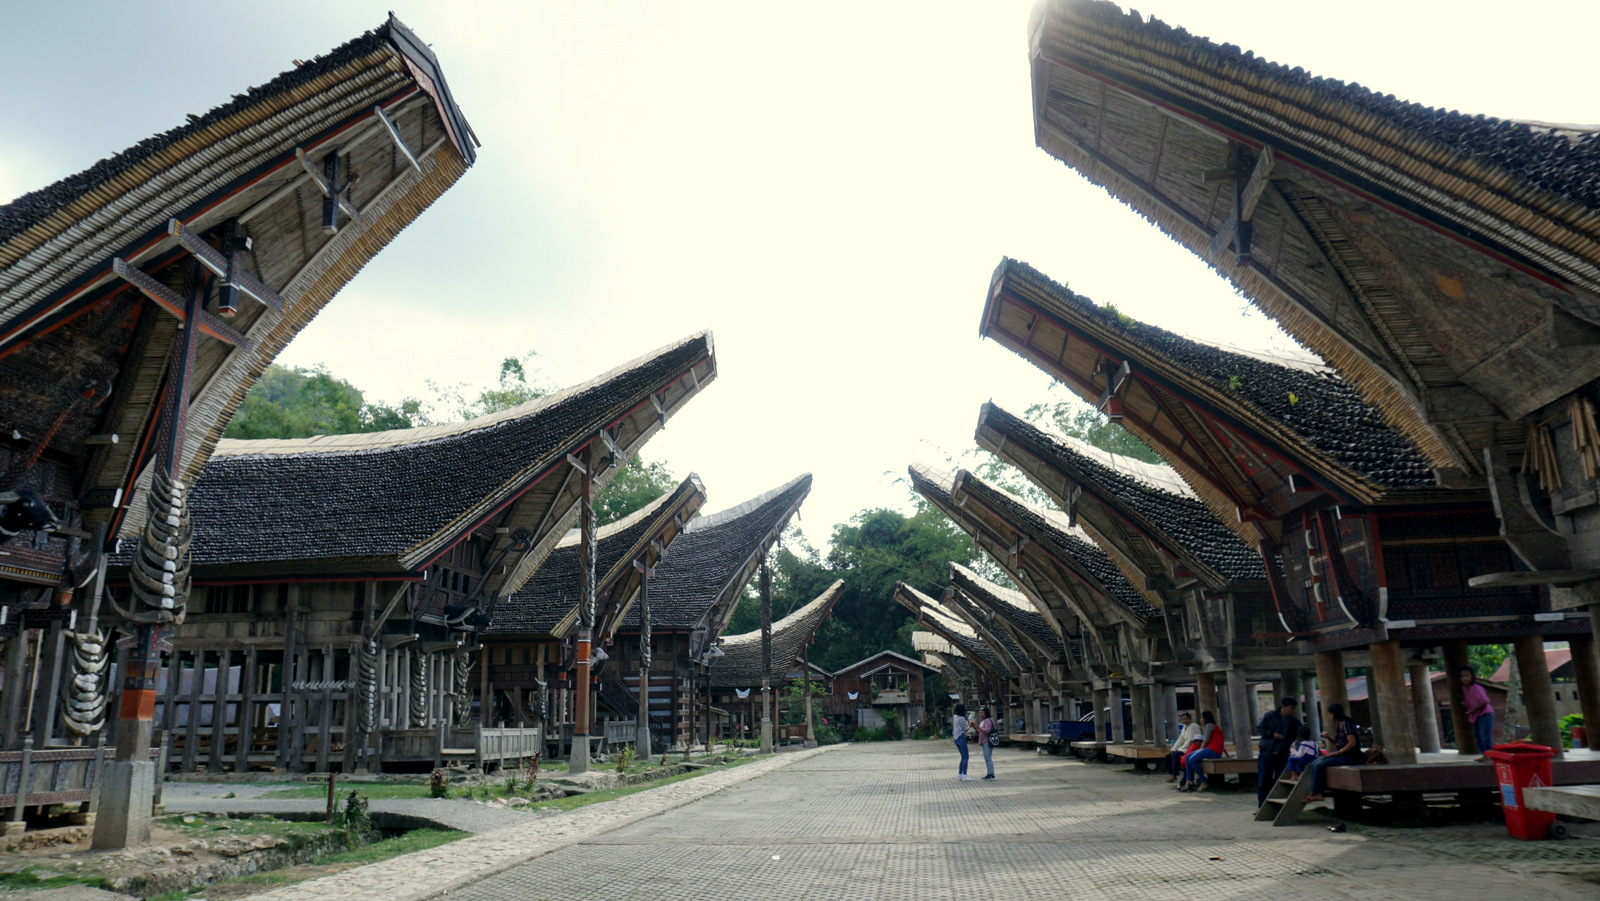 Welcome to Tana Toraja, where villages like this one have preserved their distinctively-roofed ancestral houses, called tongkonan. In line with tradition, the houses face rice barns. Photo by Upneet Kaur-Nagpal